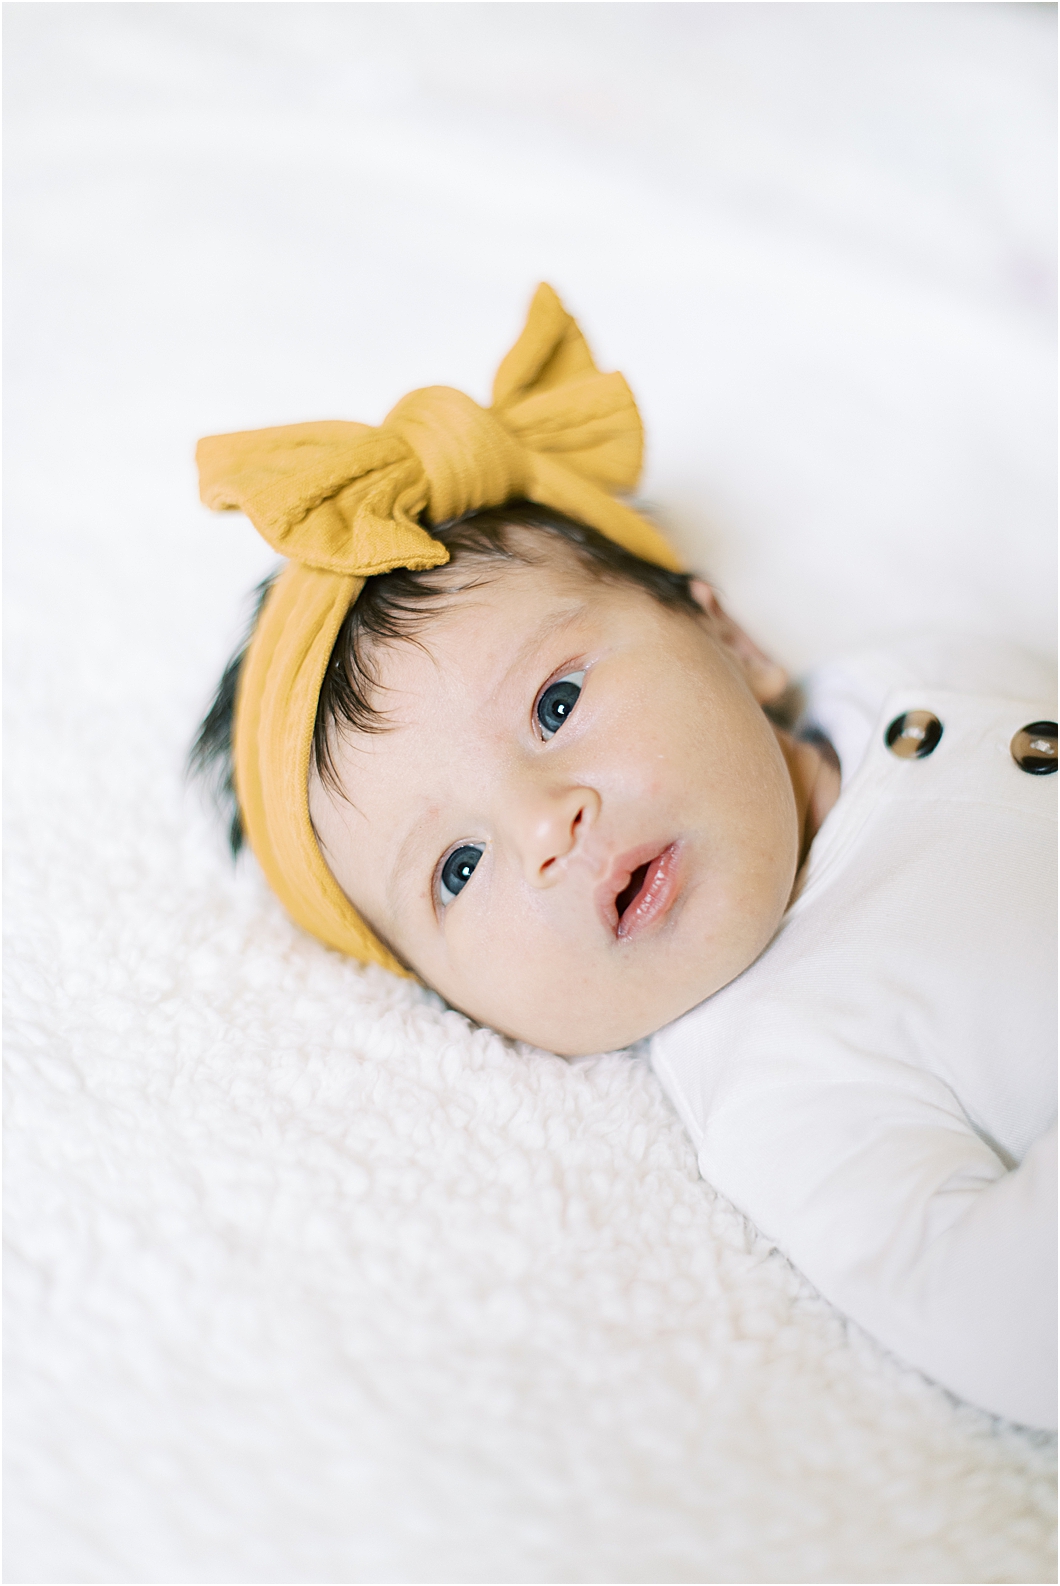 Tips on How to Prepare for Newborn Photos by Hillary Muelleck